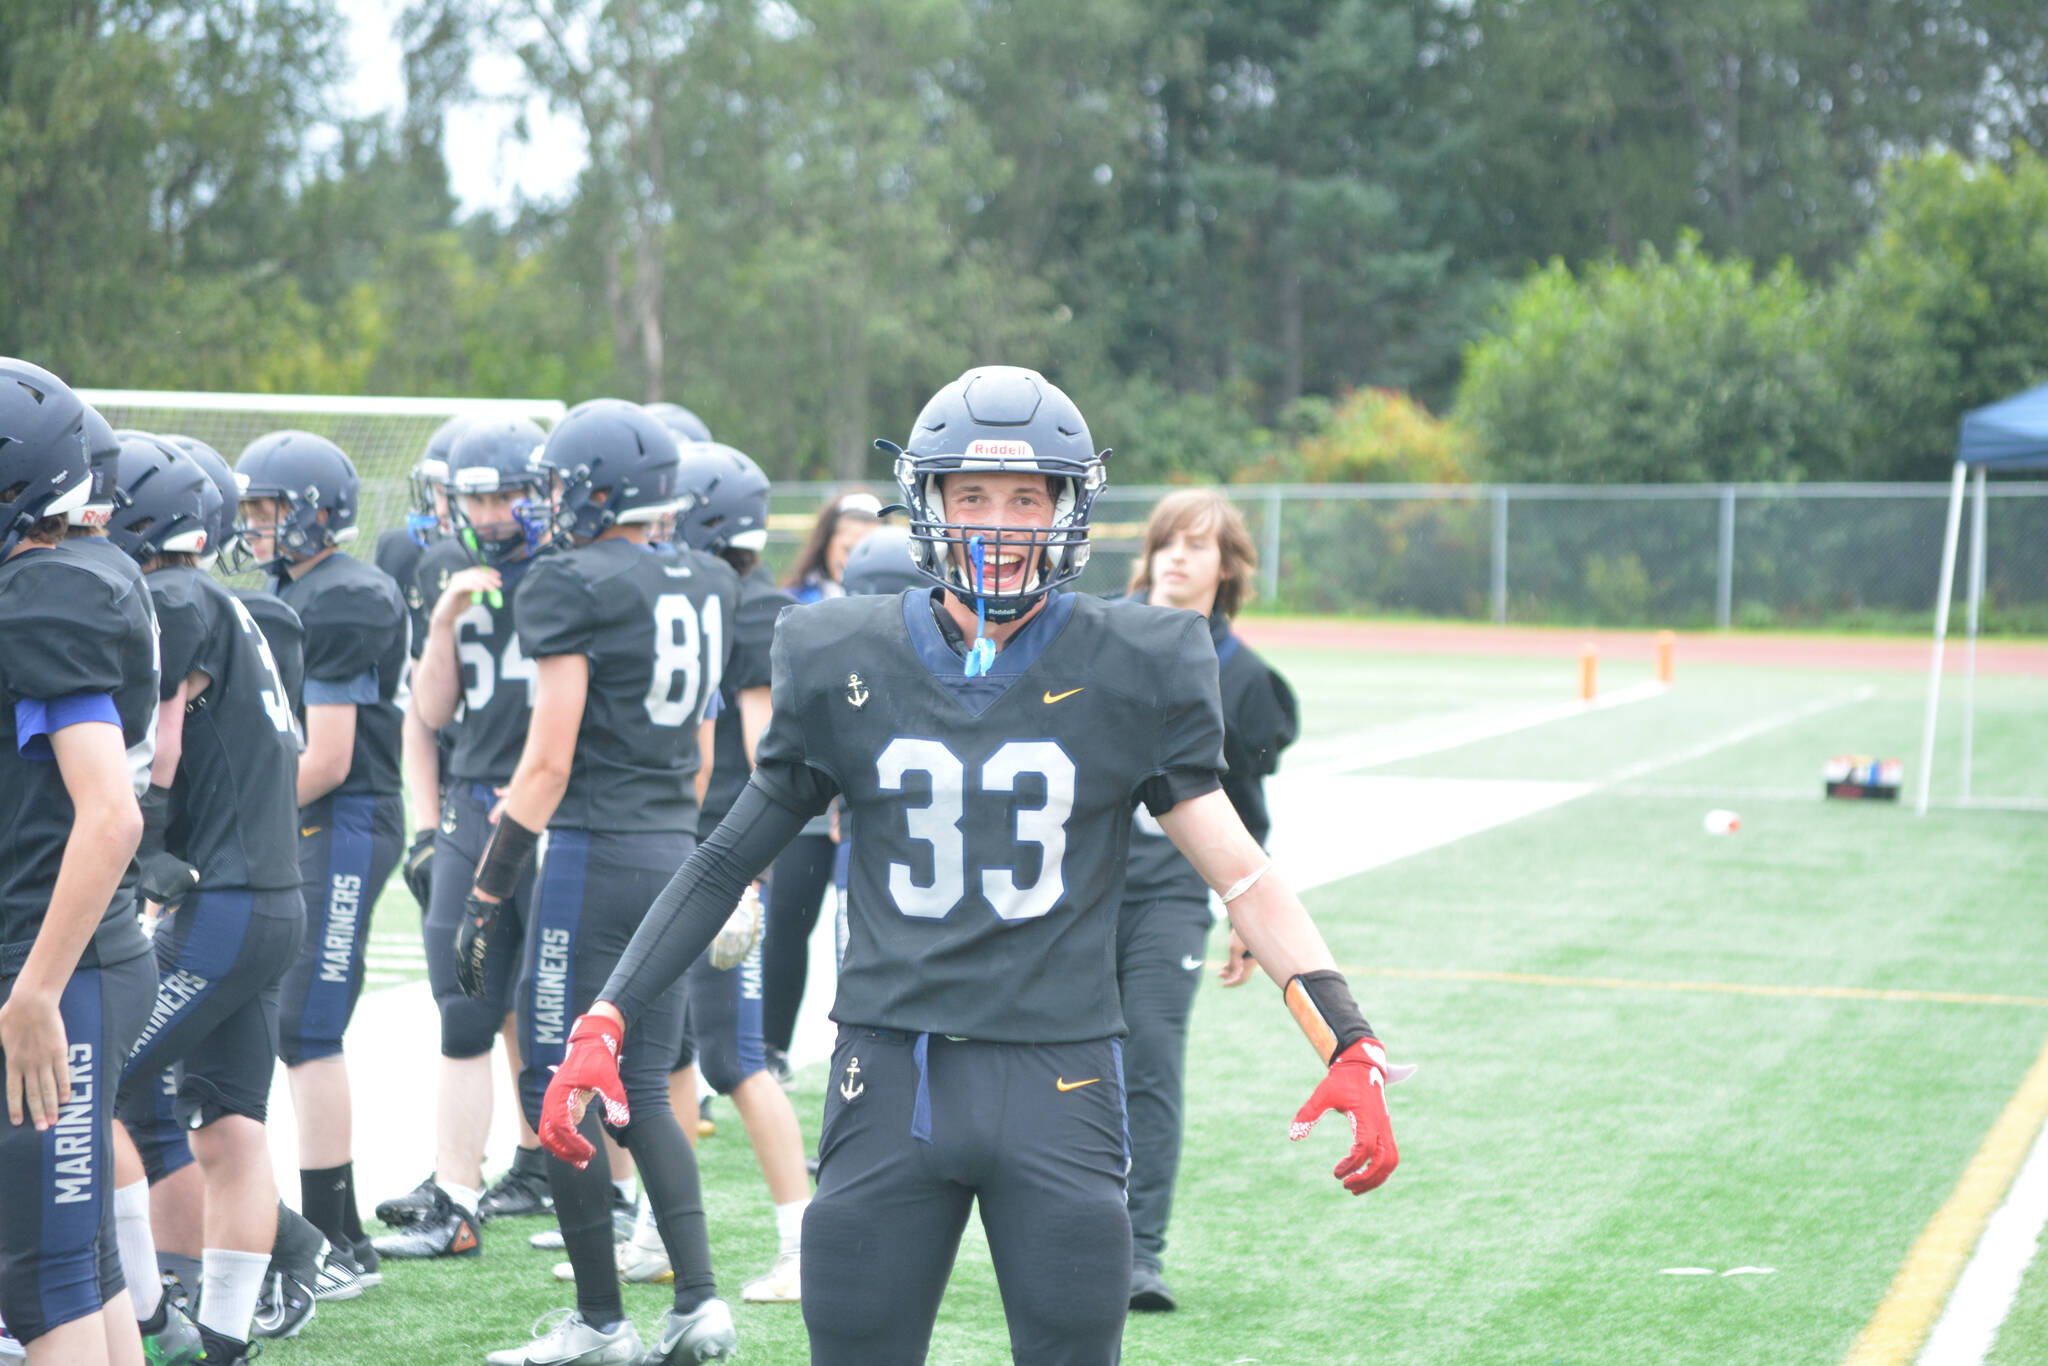 Mariner Jake Tappan celebrates after an invigorated on-field performance on Saturday, Aug. 13, 2022, at Homer High School in Homer, Alaska. (Photo by Charlie Menke/ Homer News)